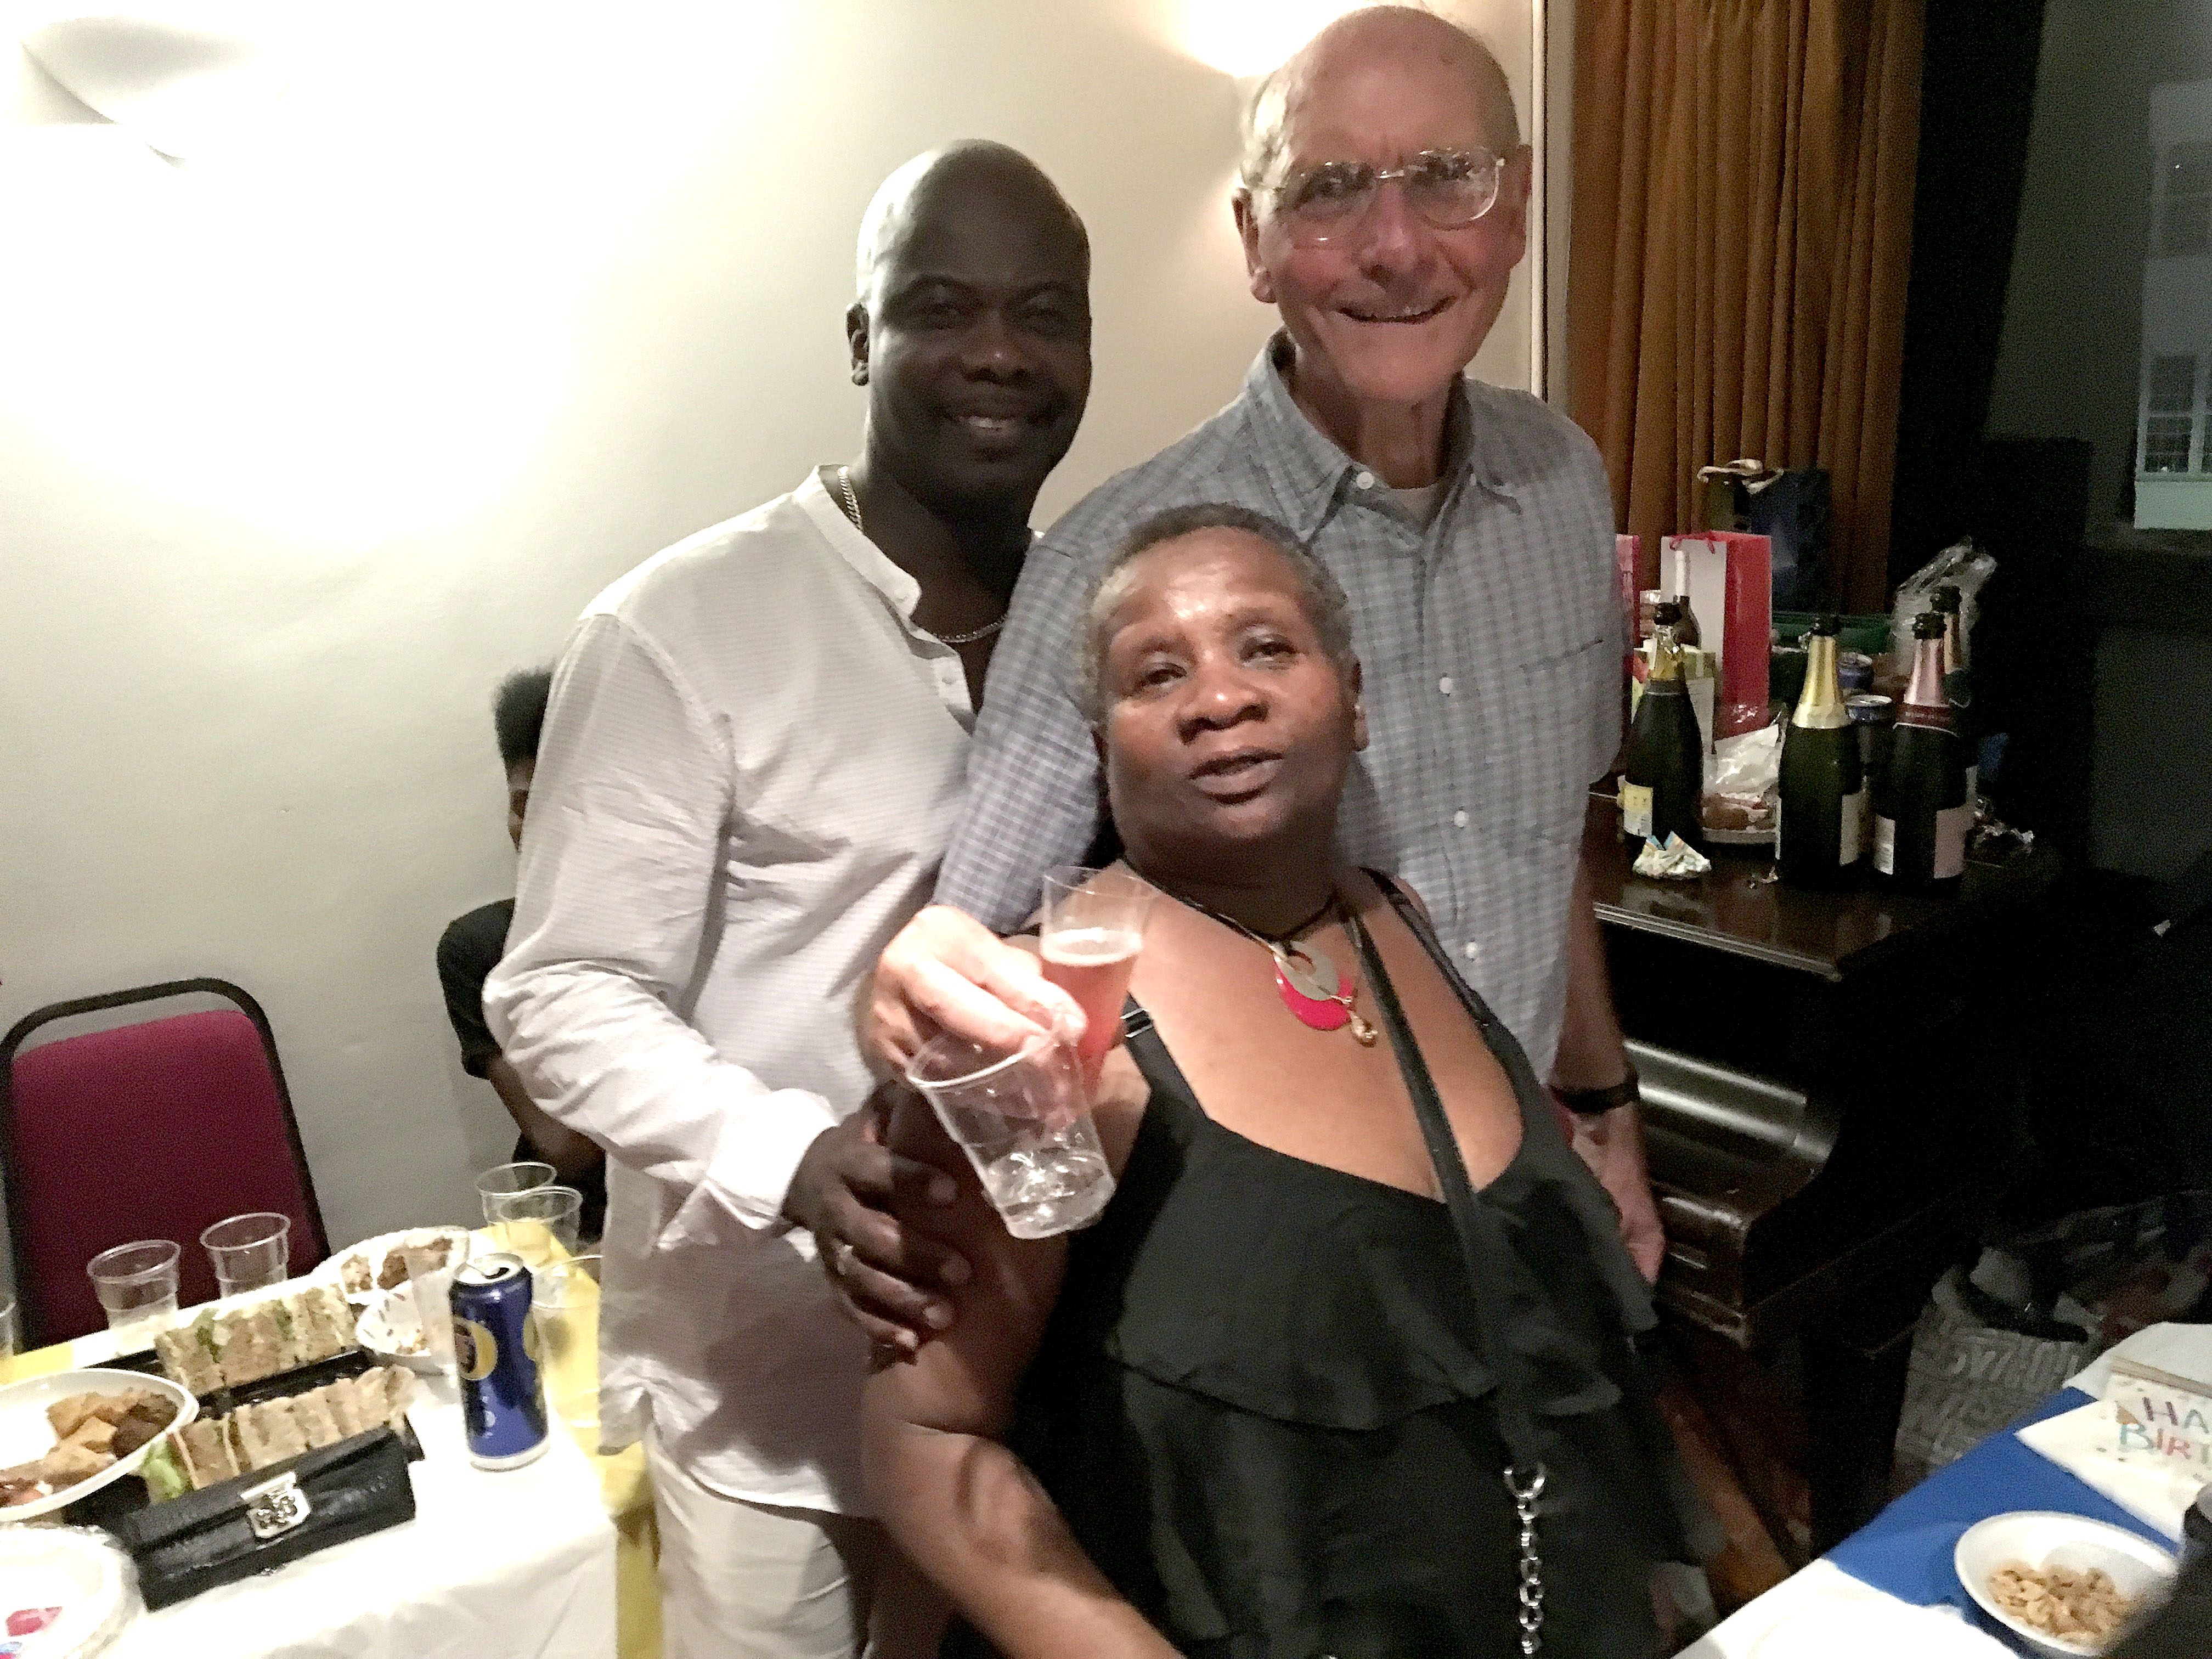 Happy: Maurice Bolwell, who celebrated his 80th birthday, pictured with his wife and friend